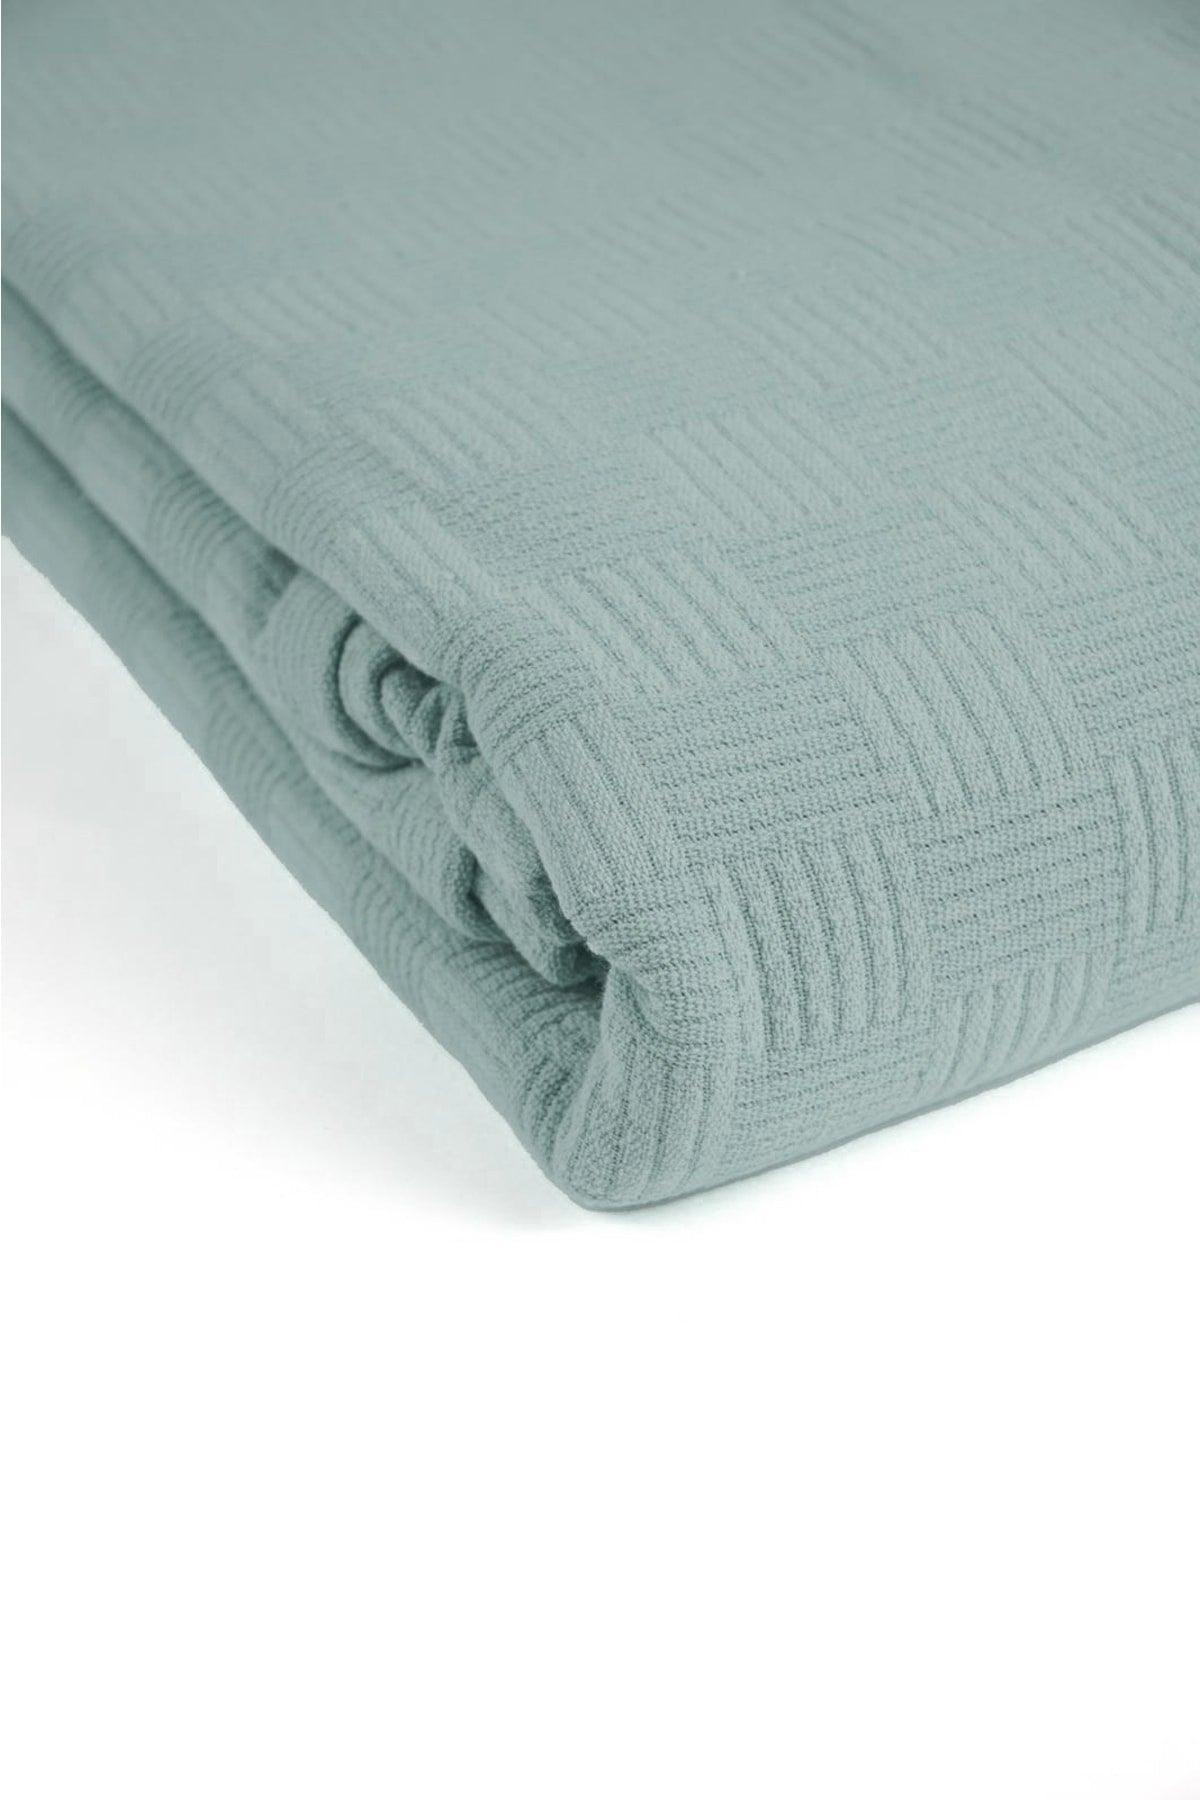 Checker Pattern Cotton Double Pique And Bedspread -Light Mint Green - Swordslife